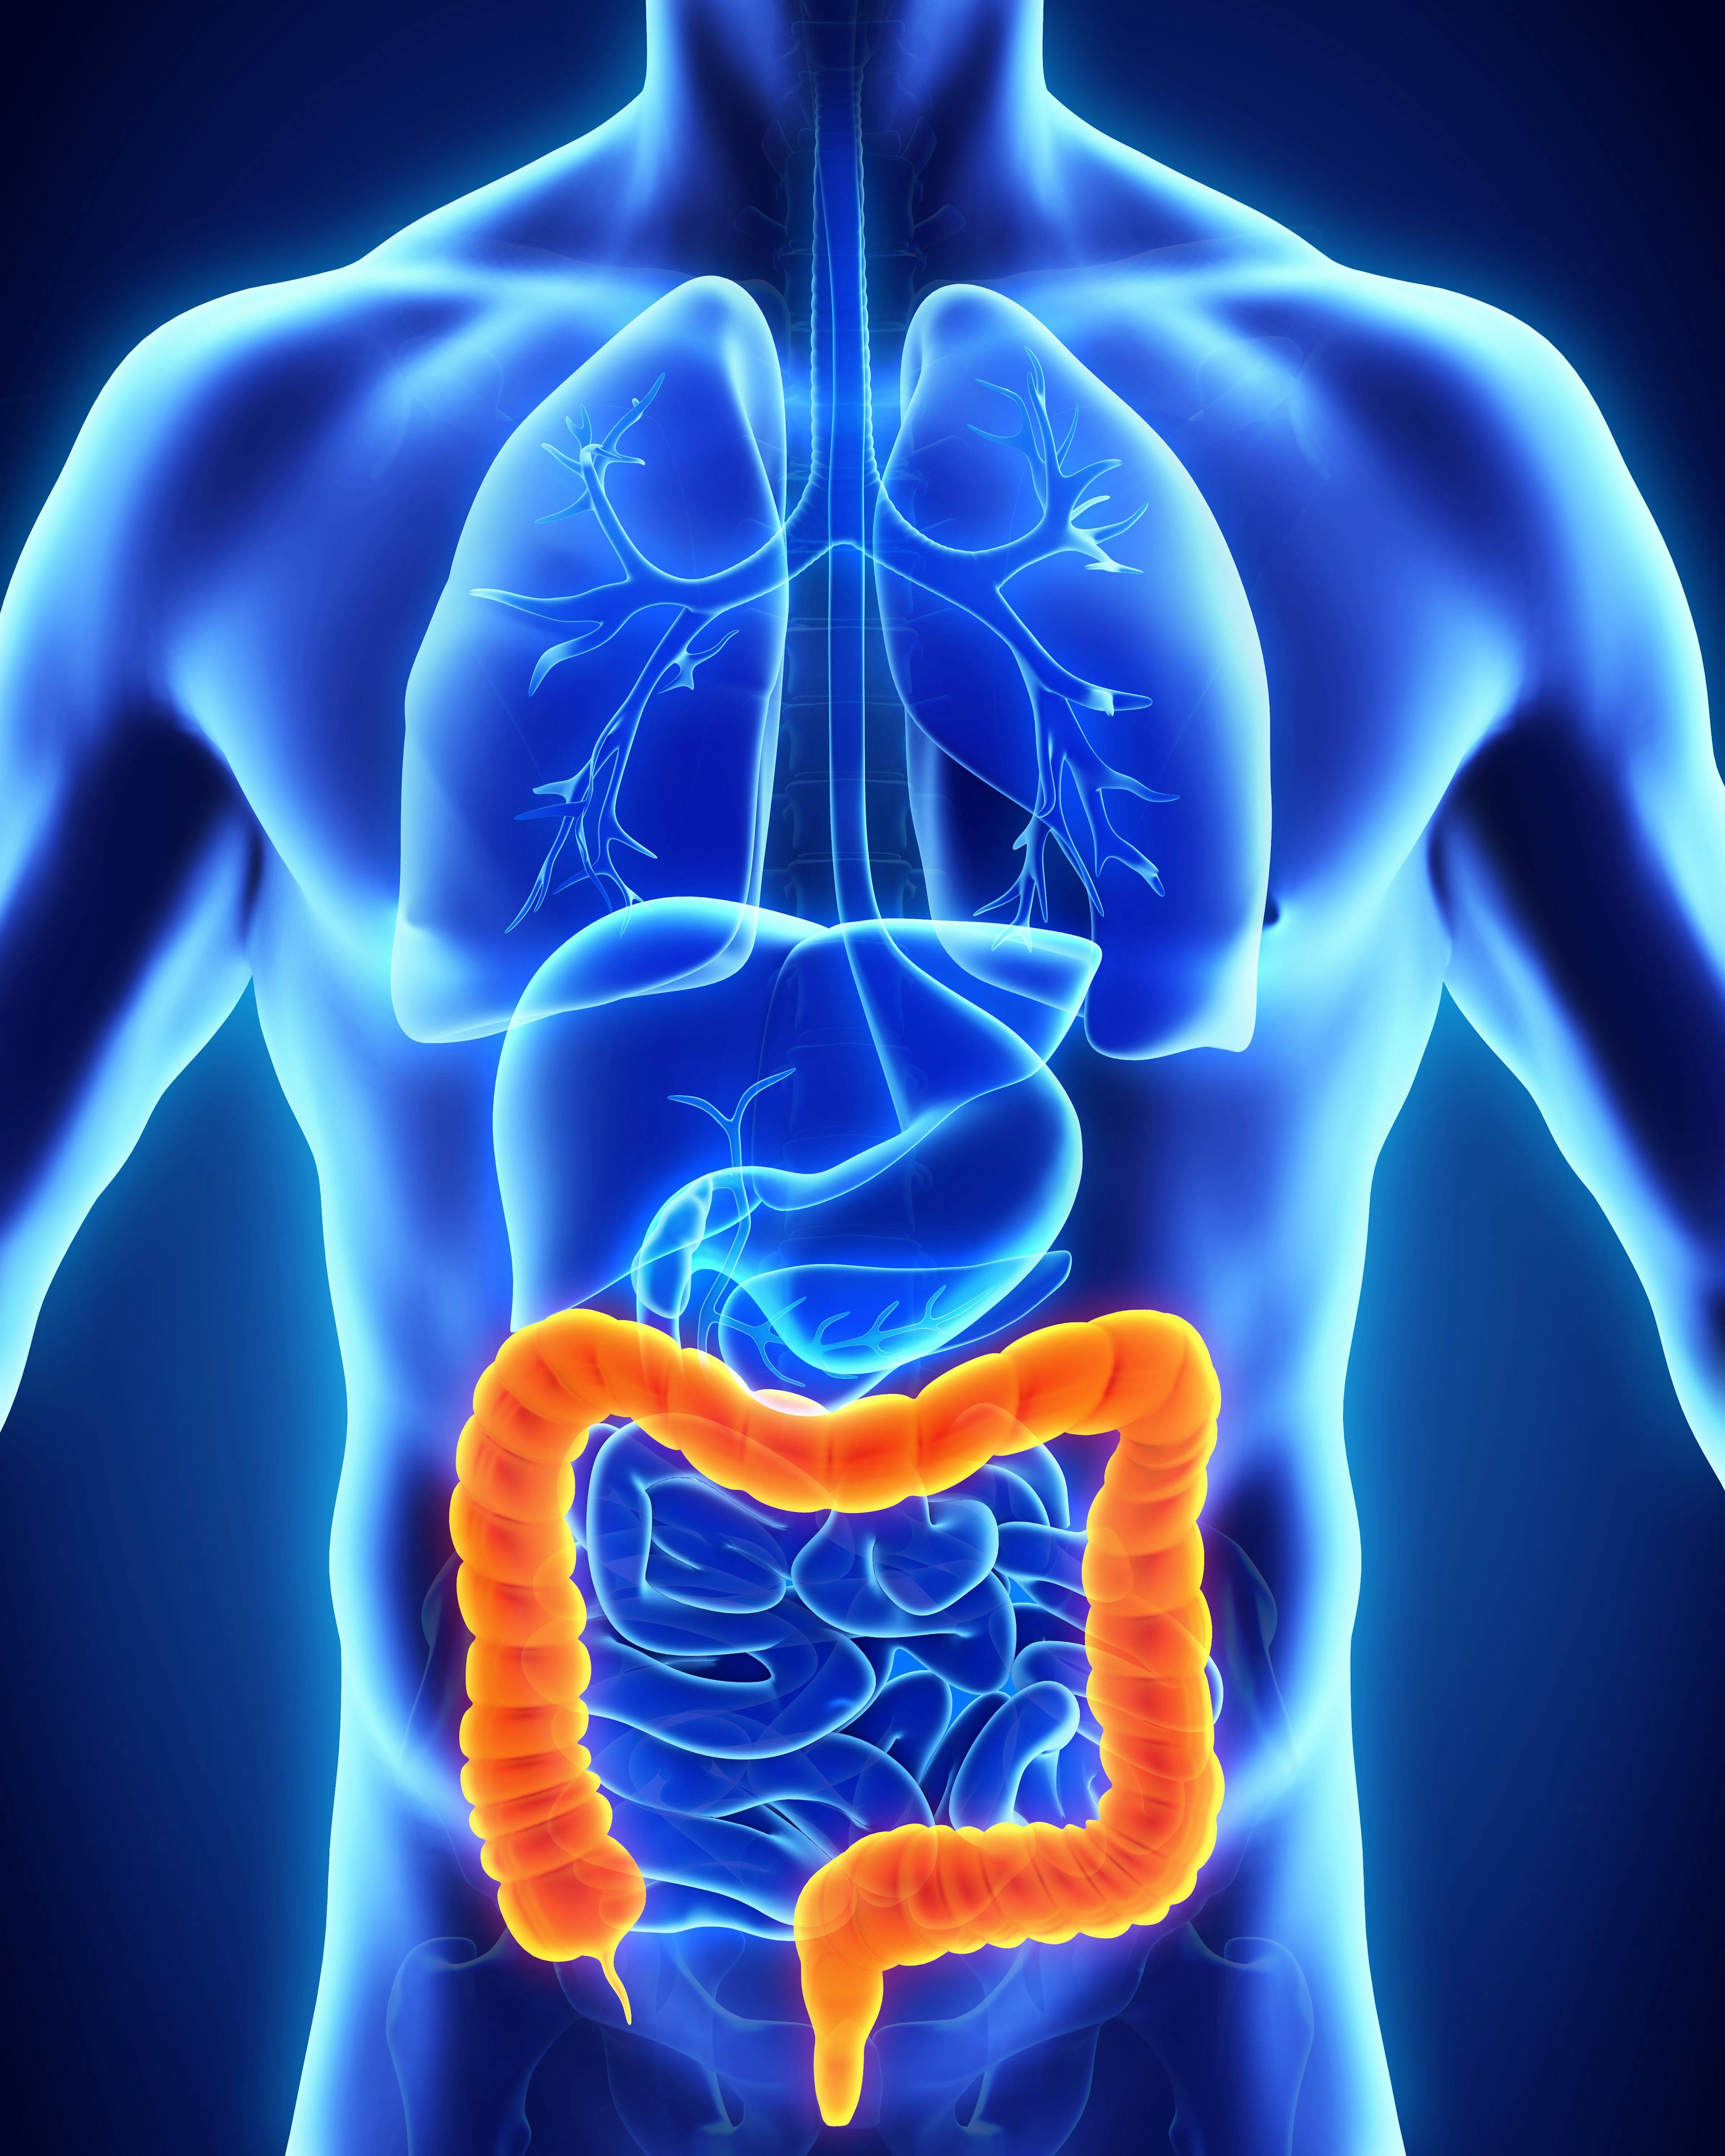 Patients with previously treated, metastatic, HER2-positive colorectal cancer may benefit from treatment with tucatinib and trastuzumab, which was granted priority review by the FDA.